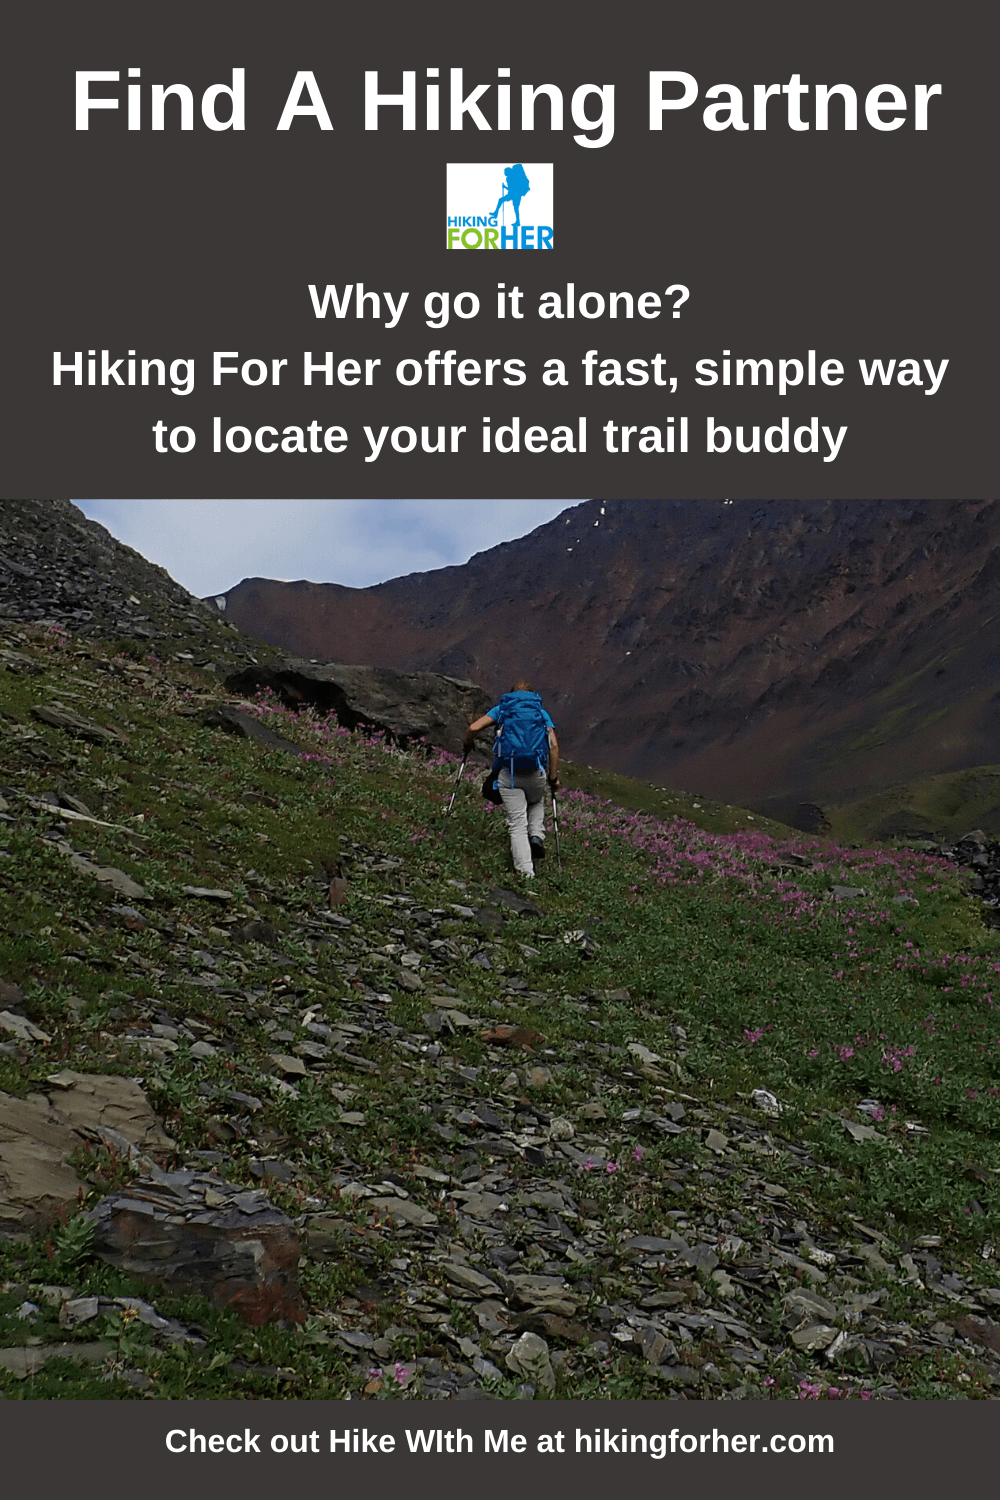 Looking for a hiking partner? Find your ideal trail buddy using Hiking For Her